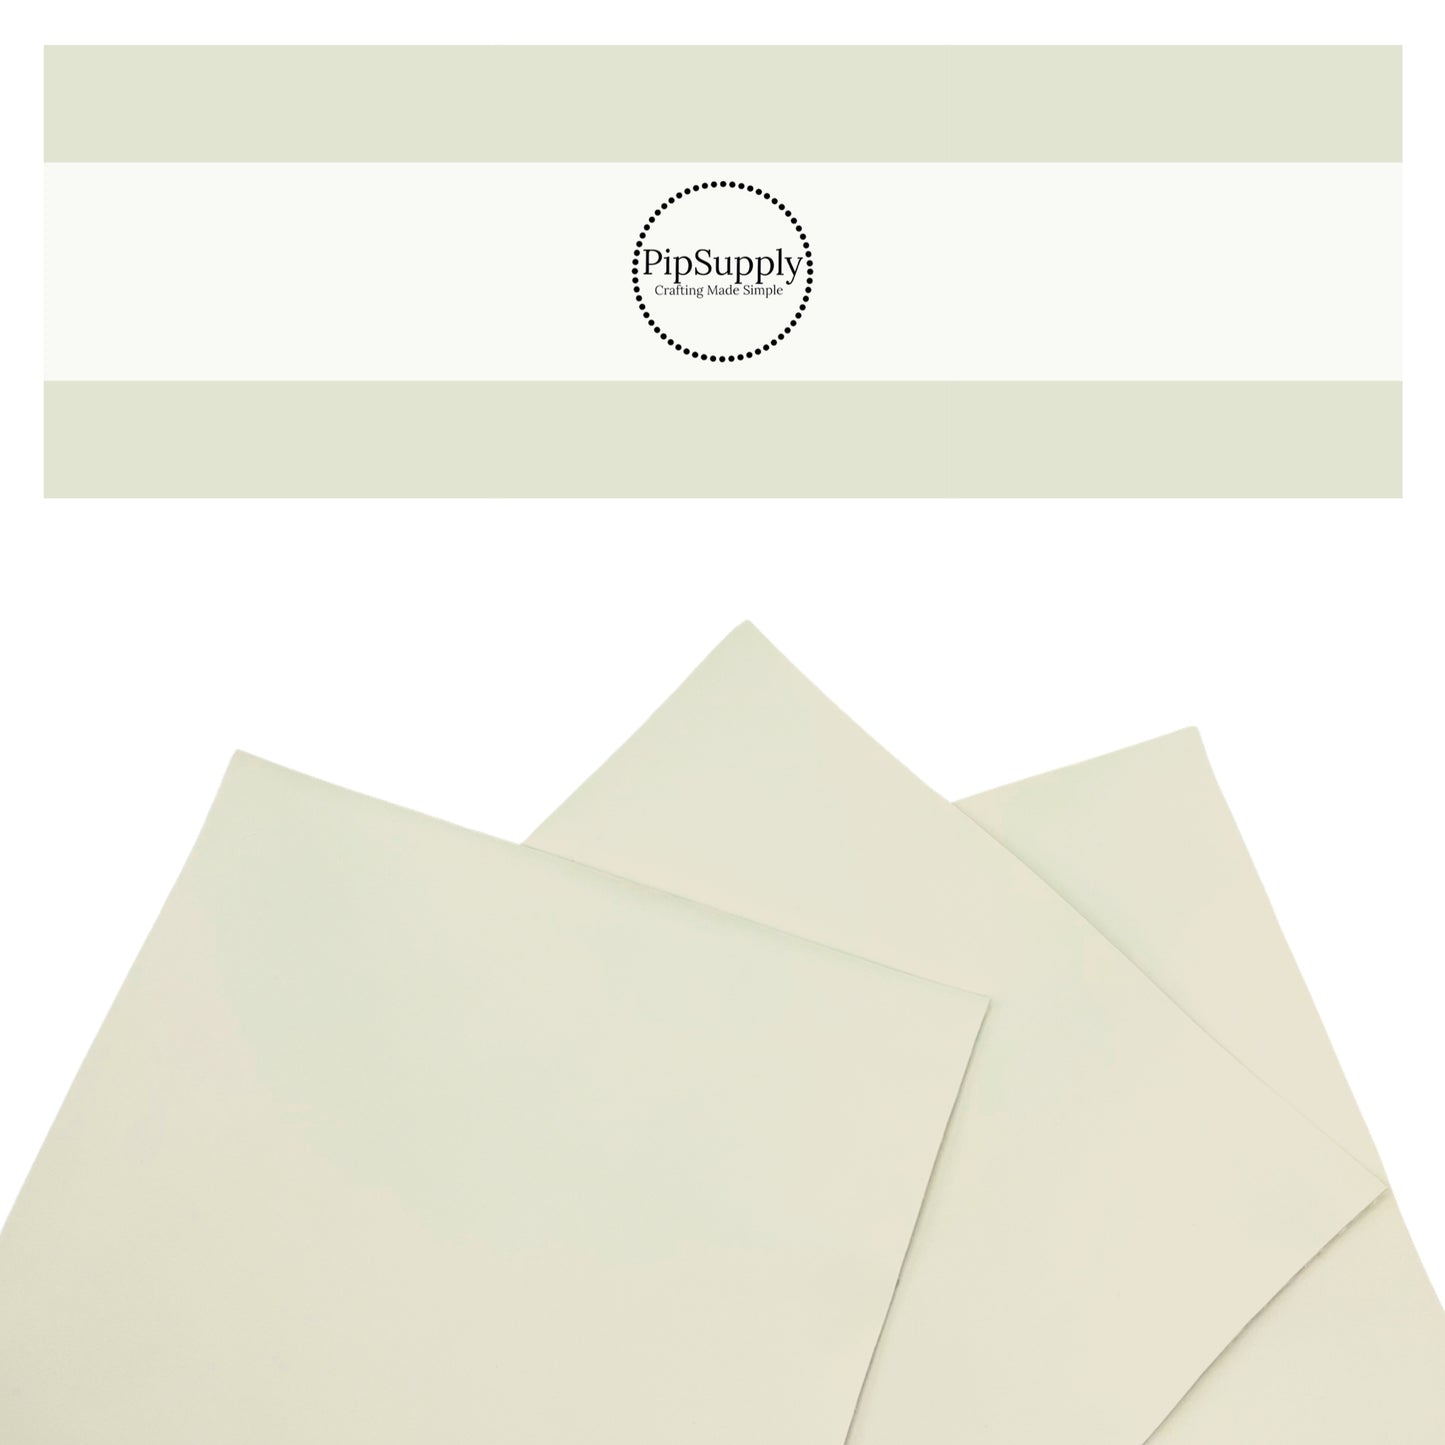 Solid colored smooth faux leather sheets in pearl ivory.